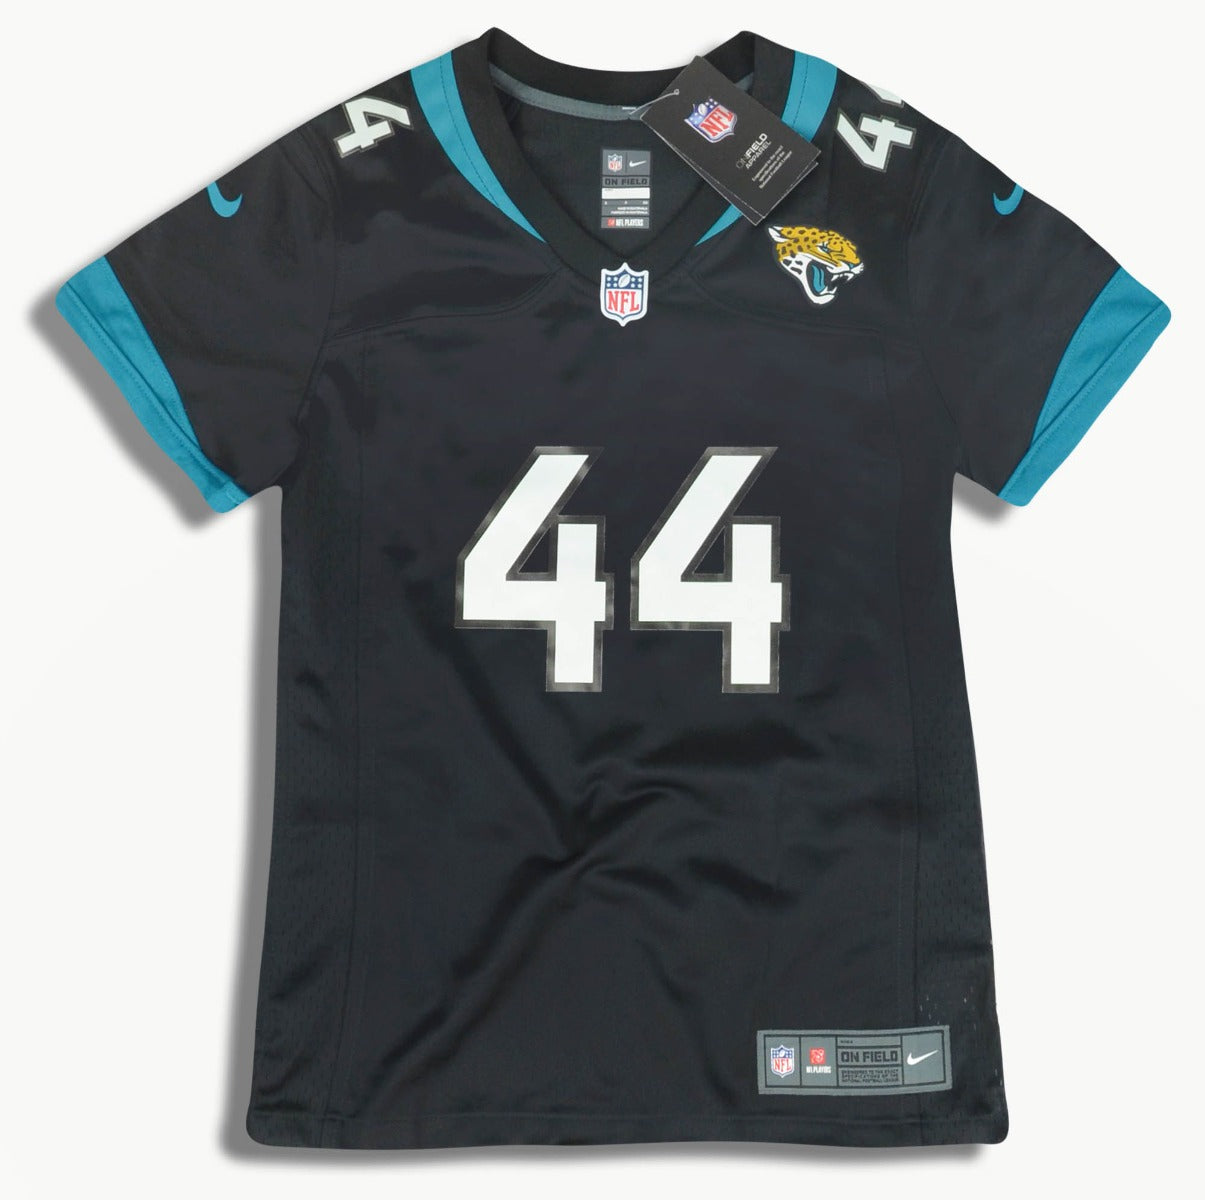 2018 JACKSONVILLE JAGUARS JACK #44 NIKE GAME JERSEY (HOME) WOMENS (S) - W/TAGS